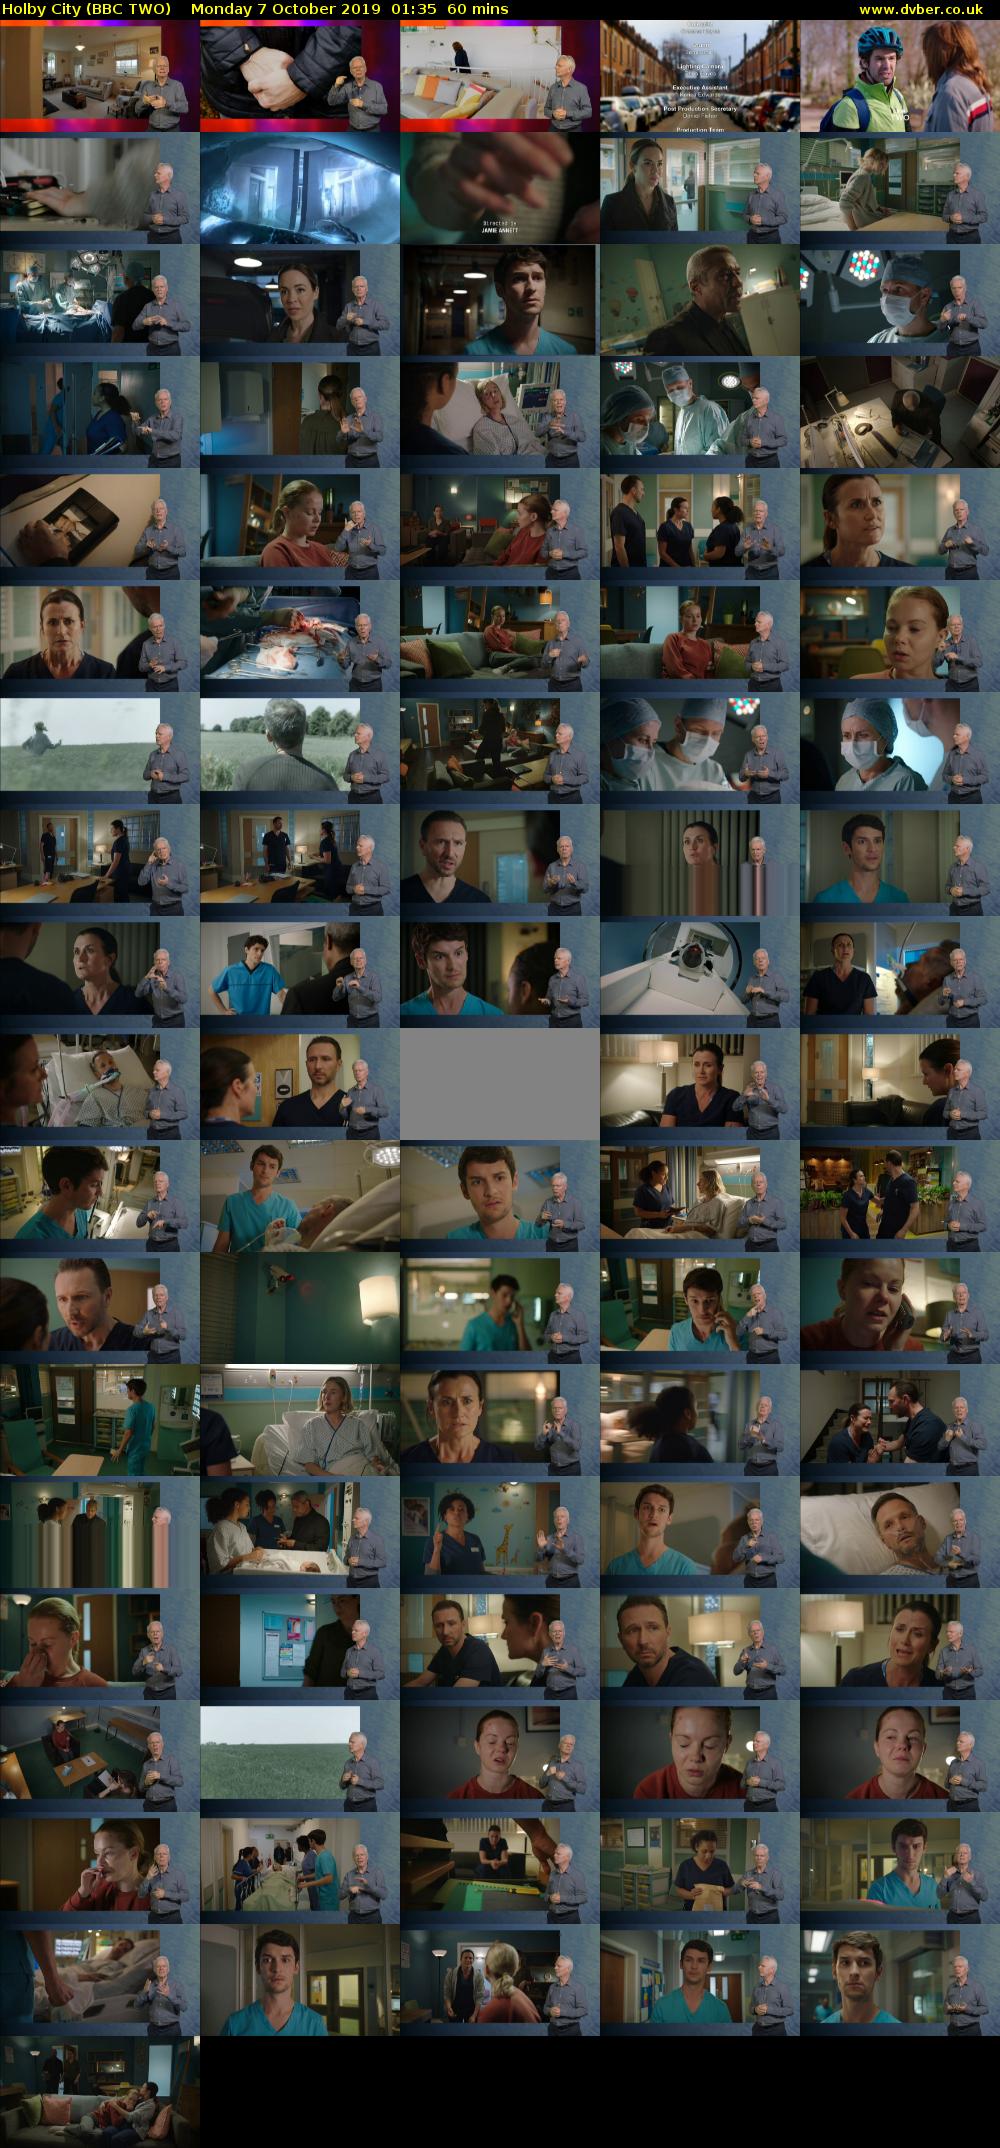 Holby City (BBC TWO) Monday 7 October 2019 01:35 - 02:35